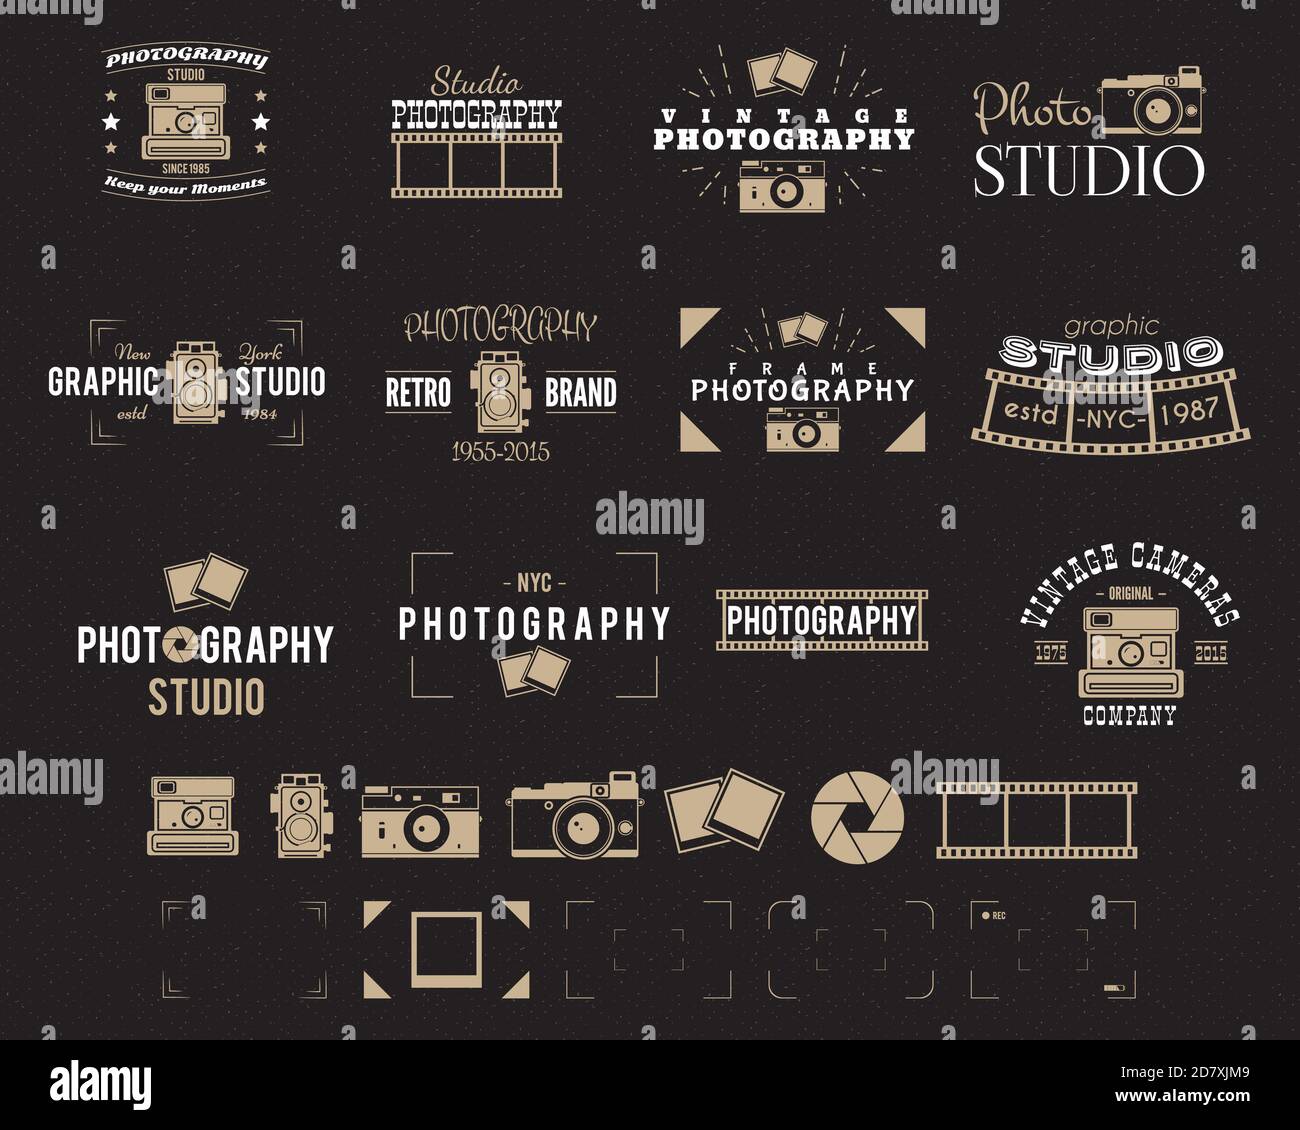 Camera logo. Vintage Photography Badges, Labels, dslr. Hipster design with photographer elements. Retro style for photo studio, photographer Stock Photo